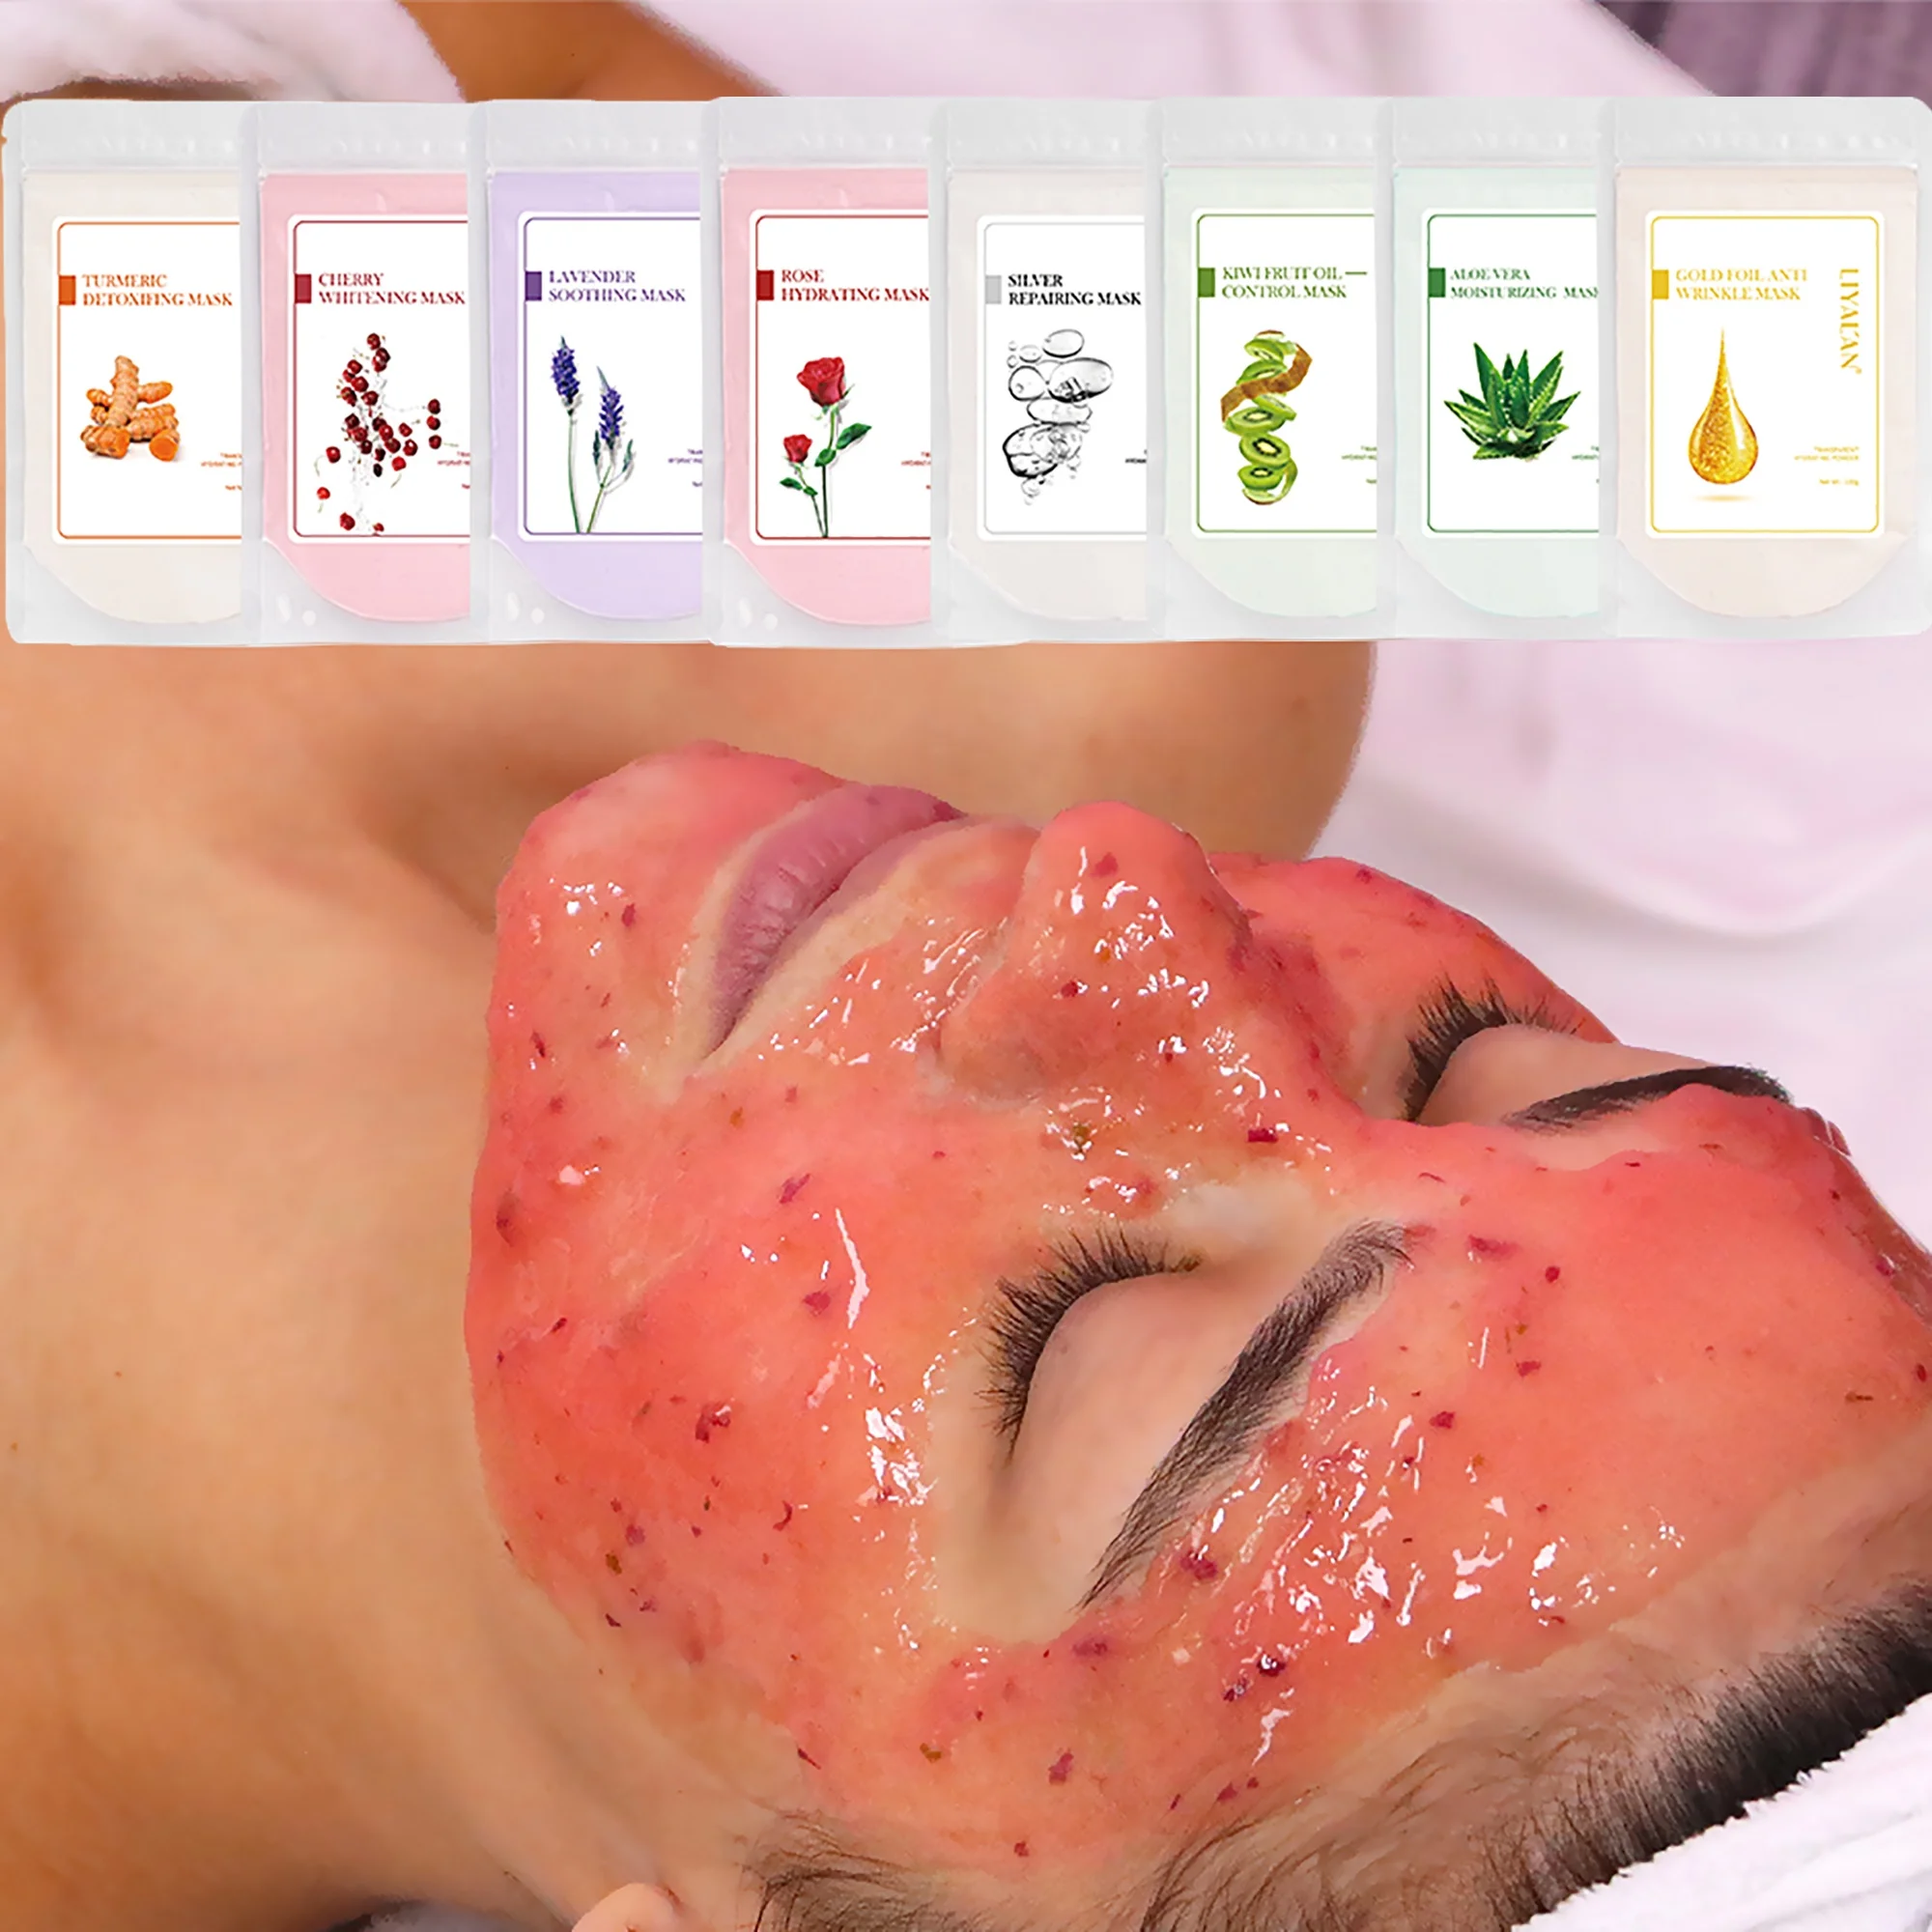 

Face & Body Mask Spa Facial Mask Peel Off Collagen Organic Hydro Jellymask Whitening Jelly Mask Powder Skin Care